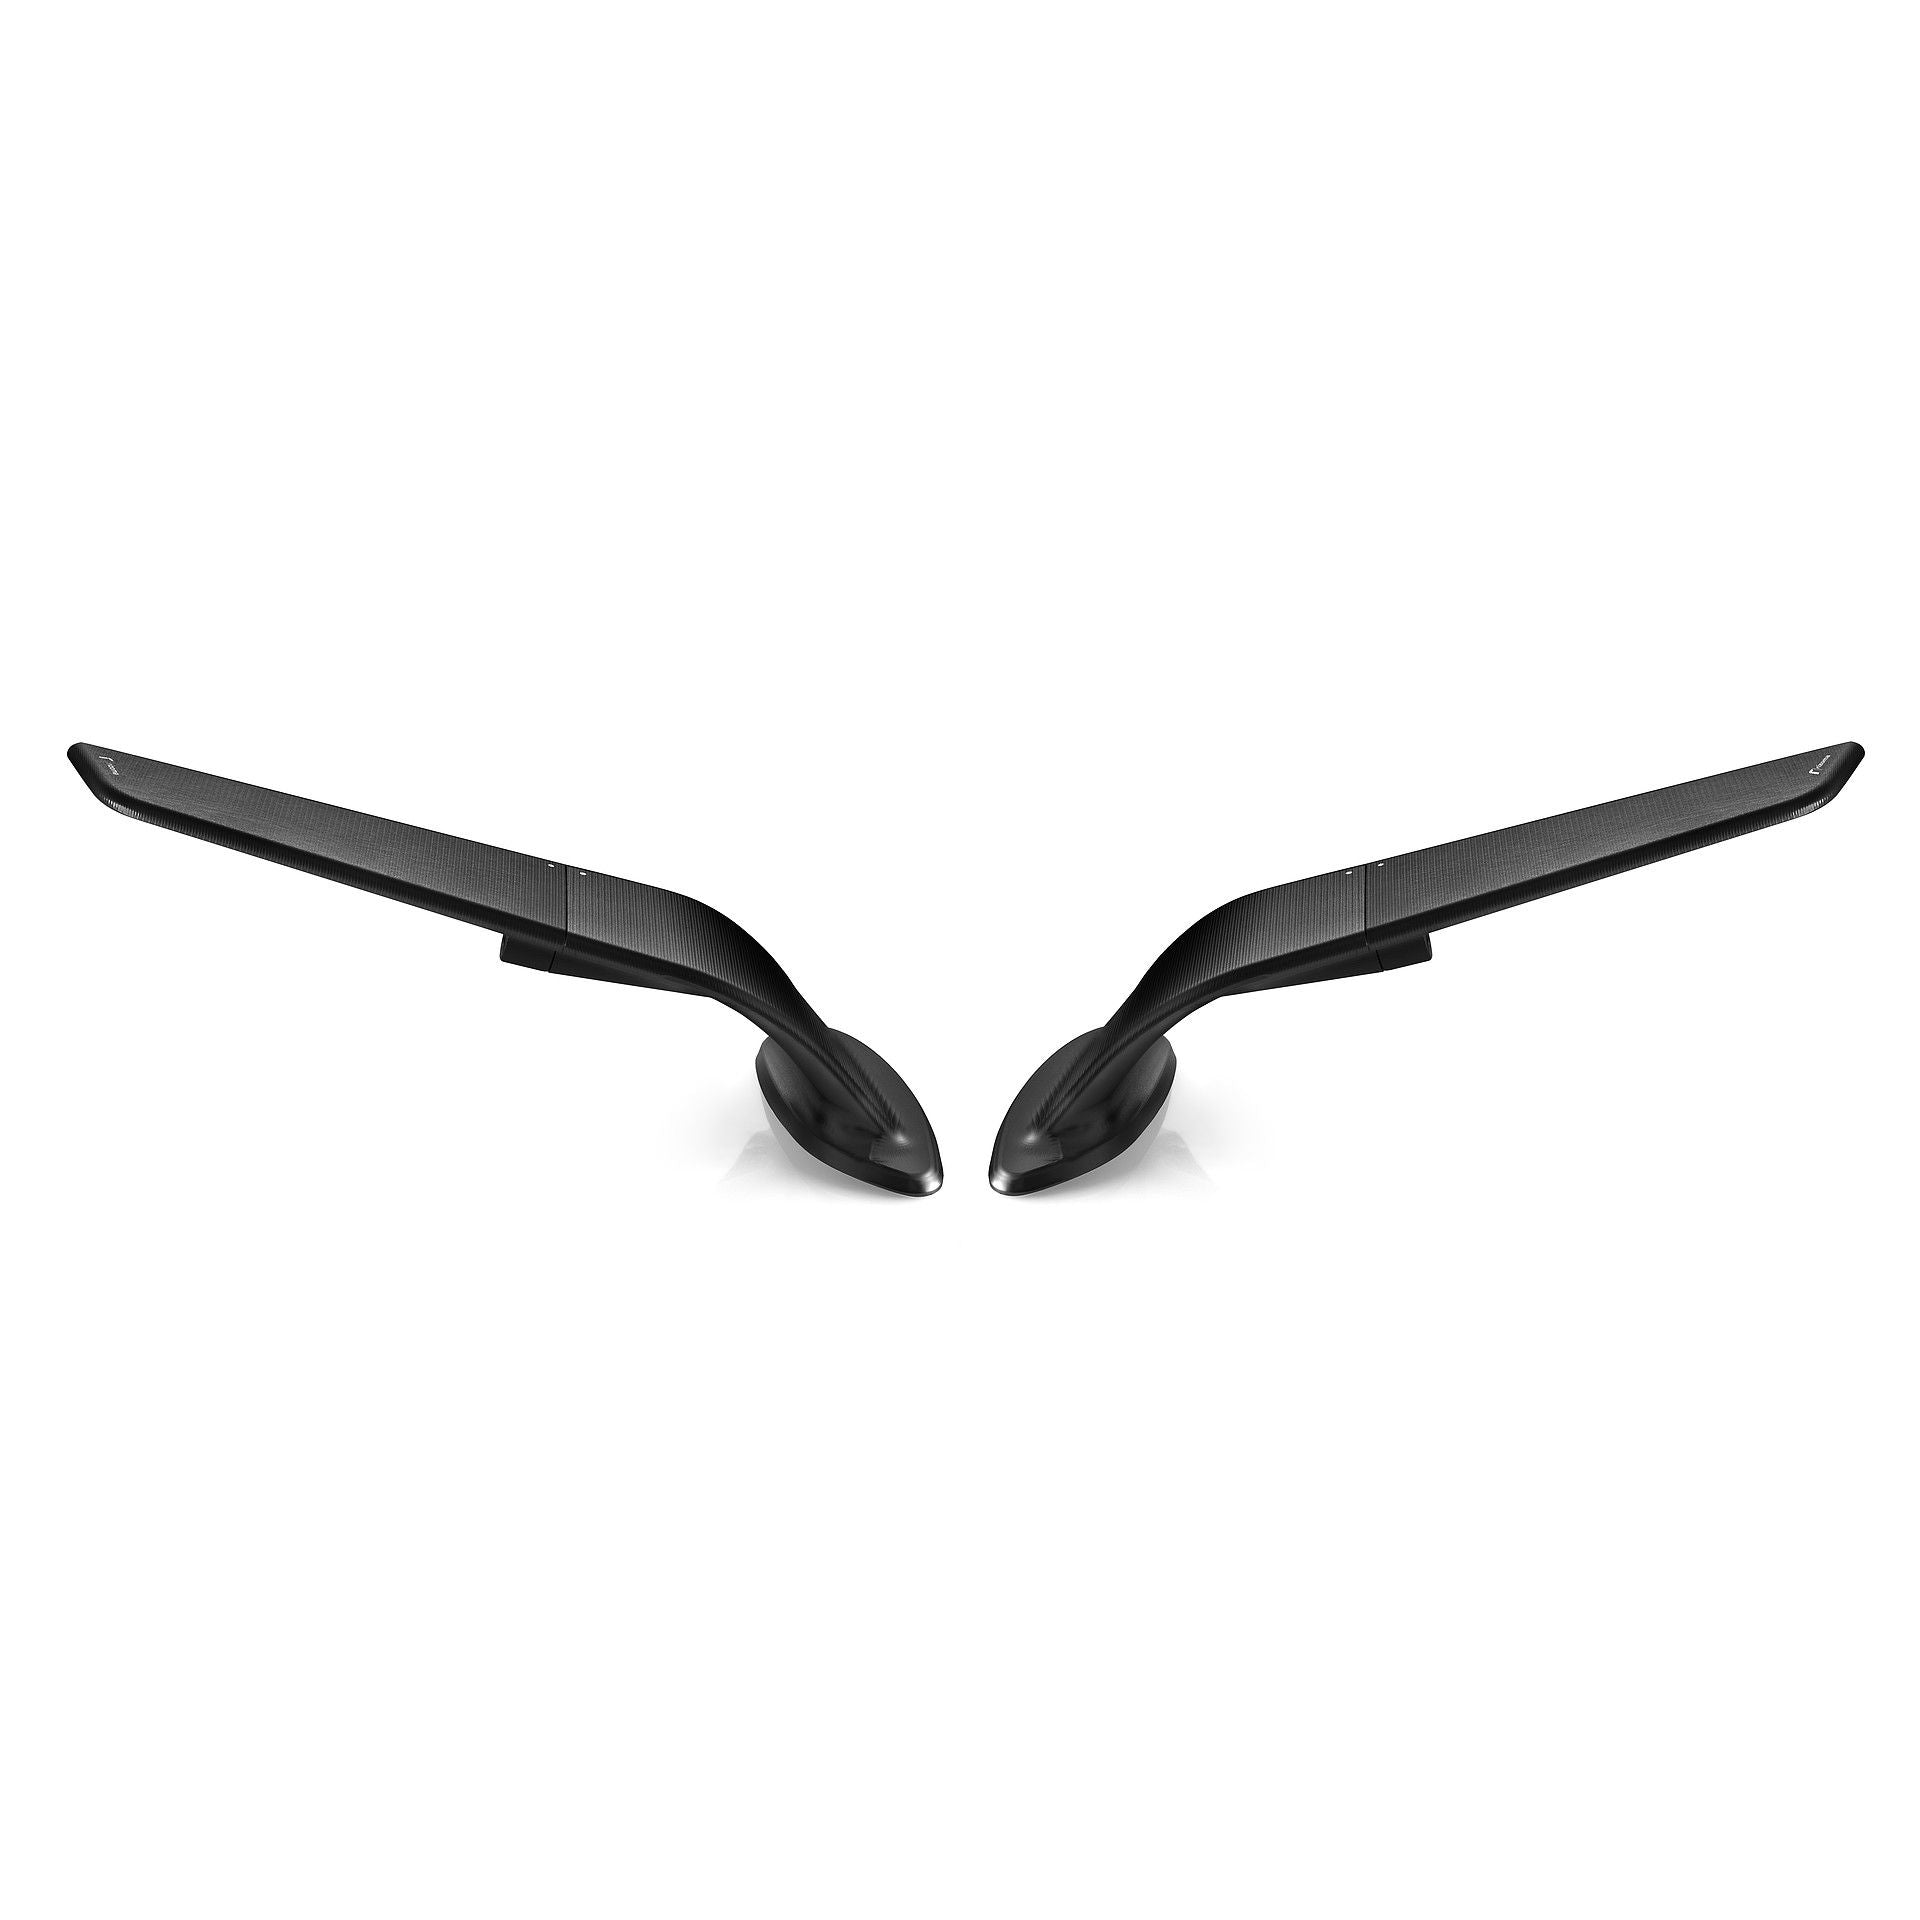 Rizoma Stealth Left & Right Mirror For BMW S1000RR Pair - Black